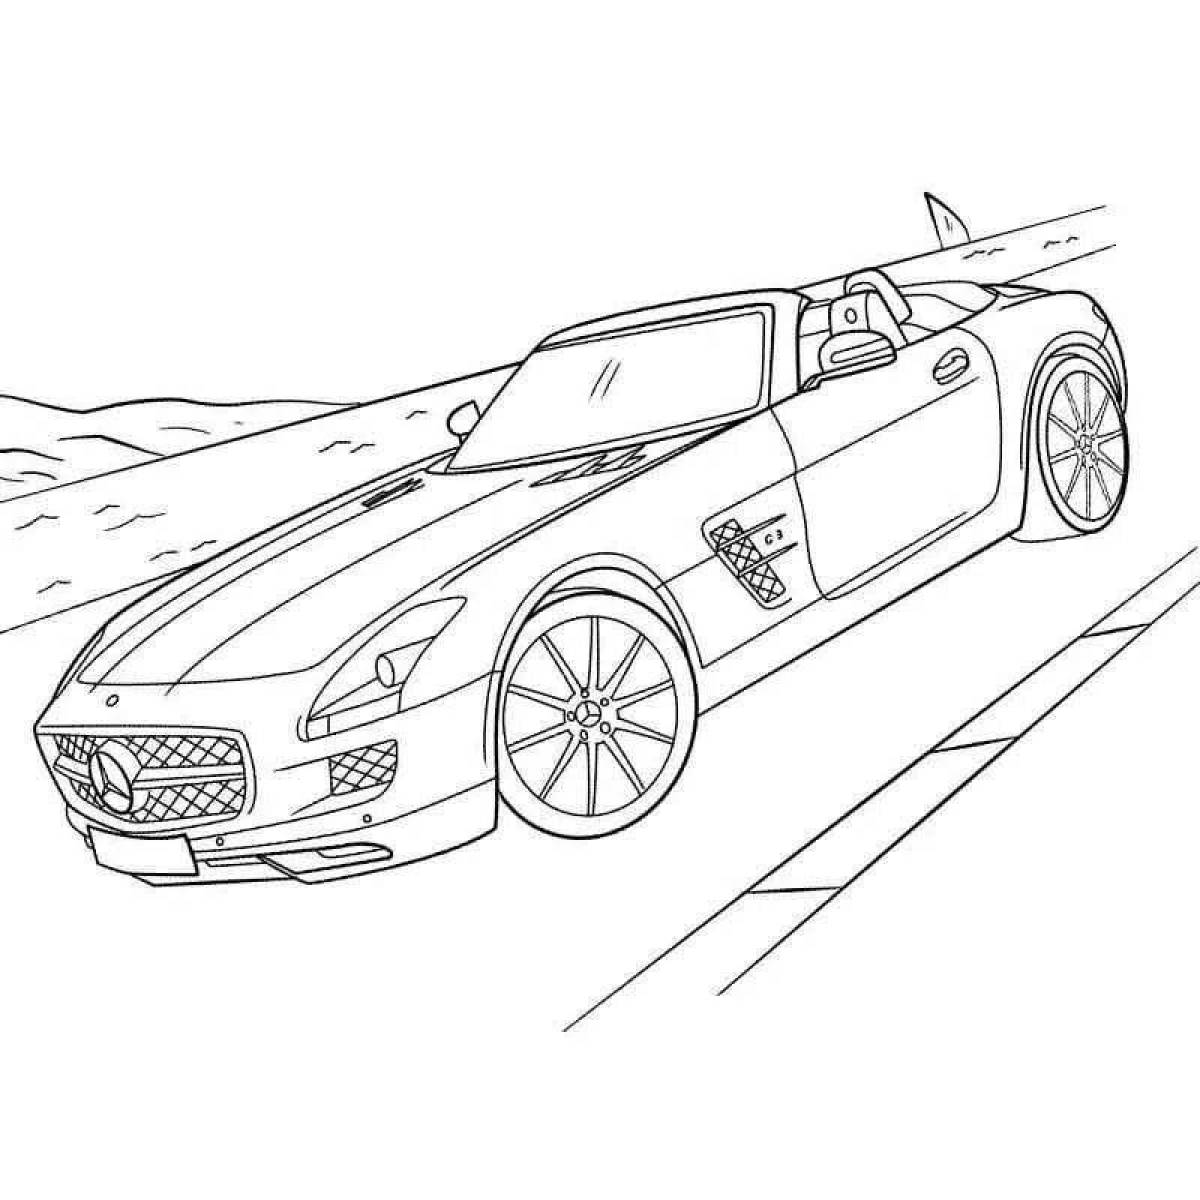 Coloring page dazzling mercedes shark